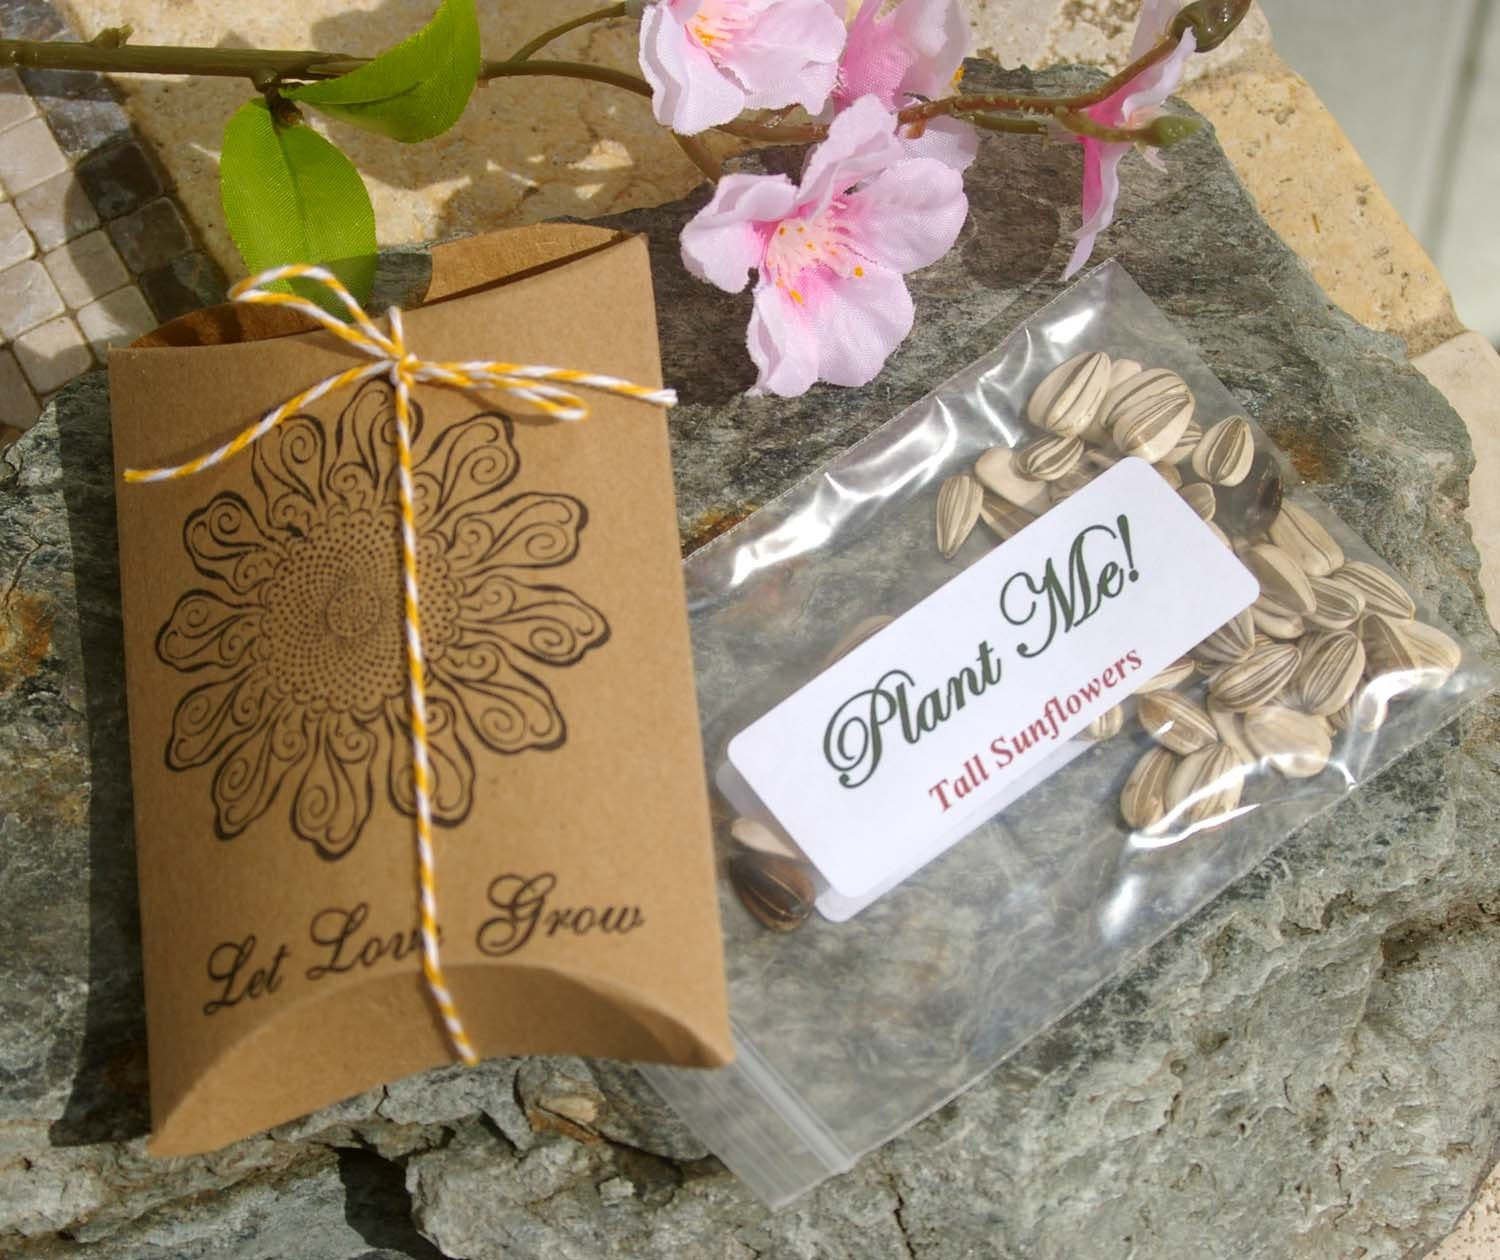 Sunflower Wedding Favors
 Wedding Favors With Sunflower Seeds Let Love Grow by